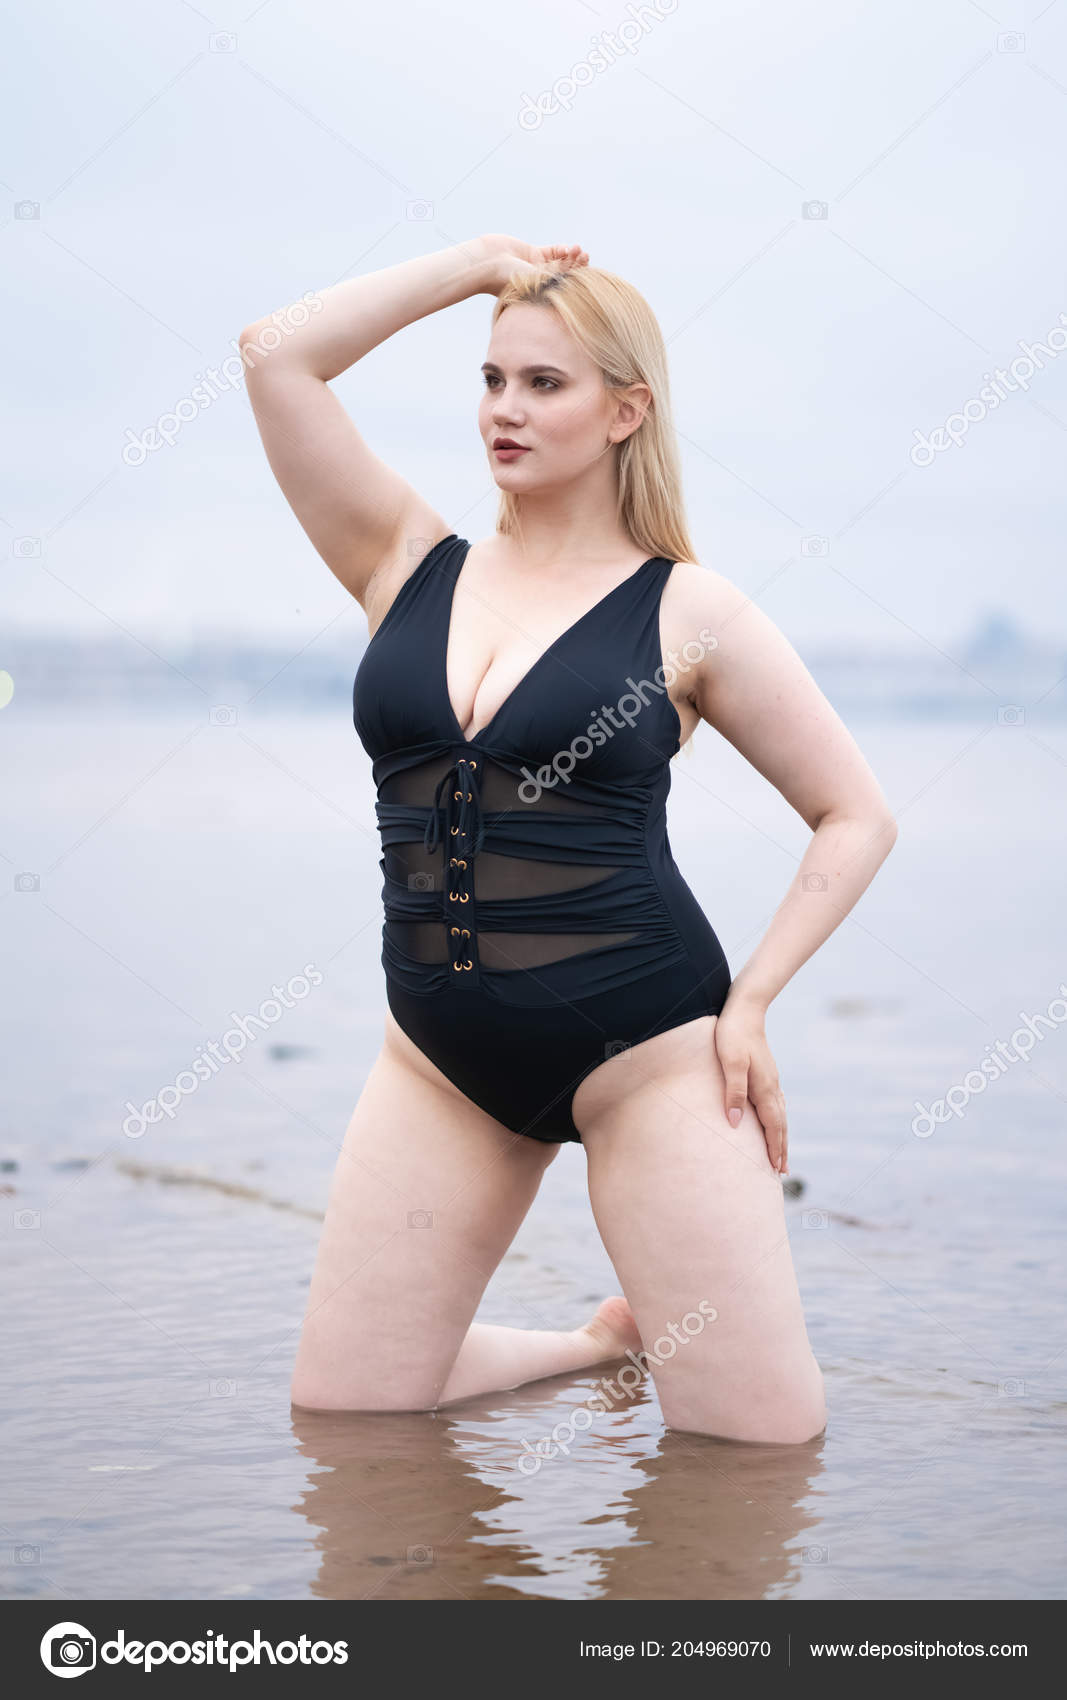 Beautiful Curvy Caucasian Girl Big Breasts Striped Swimsuit Stands